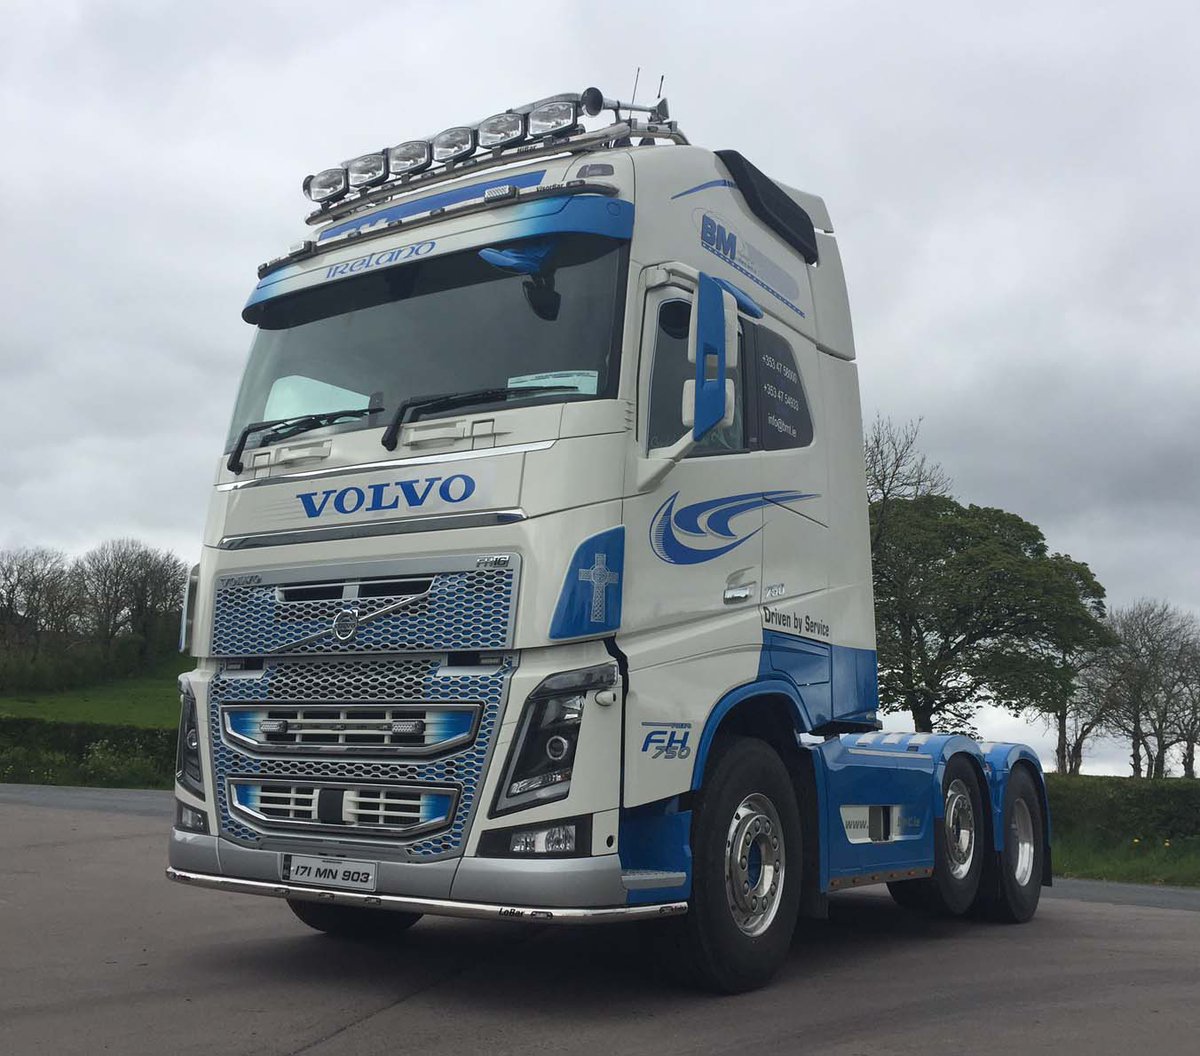 on Twitter "New Volvo FH16 750 6x2